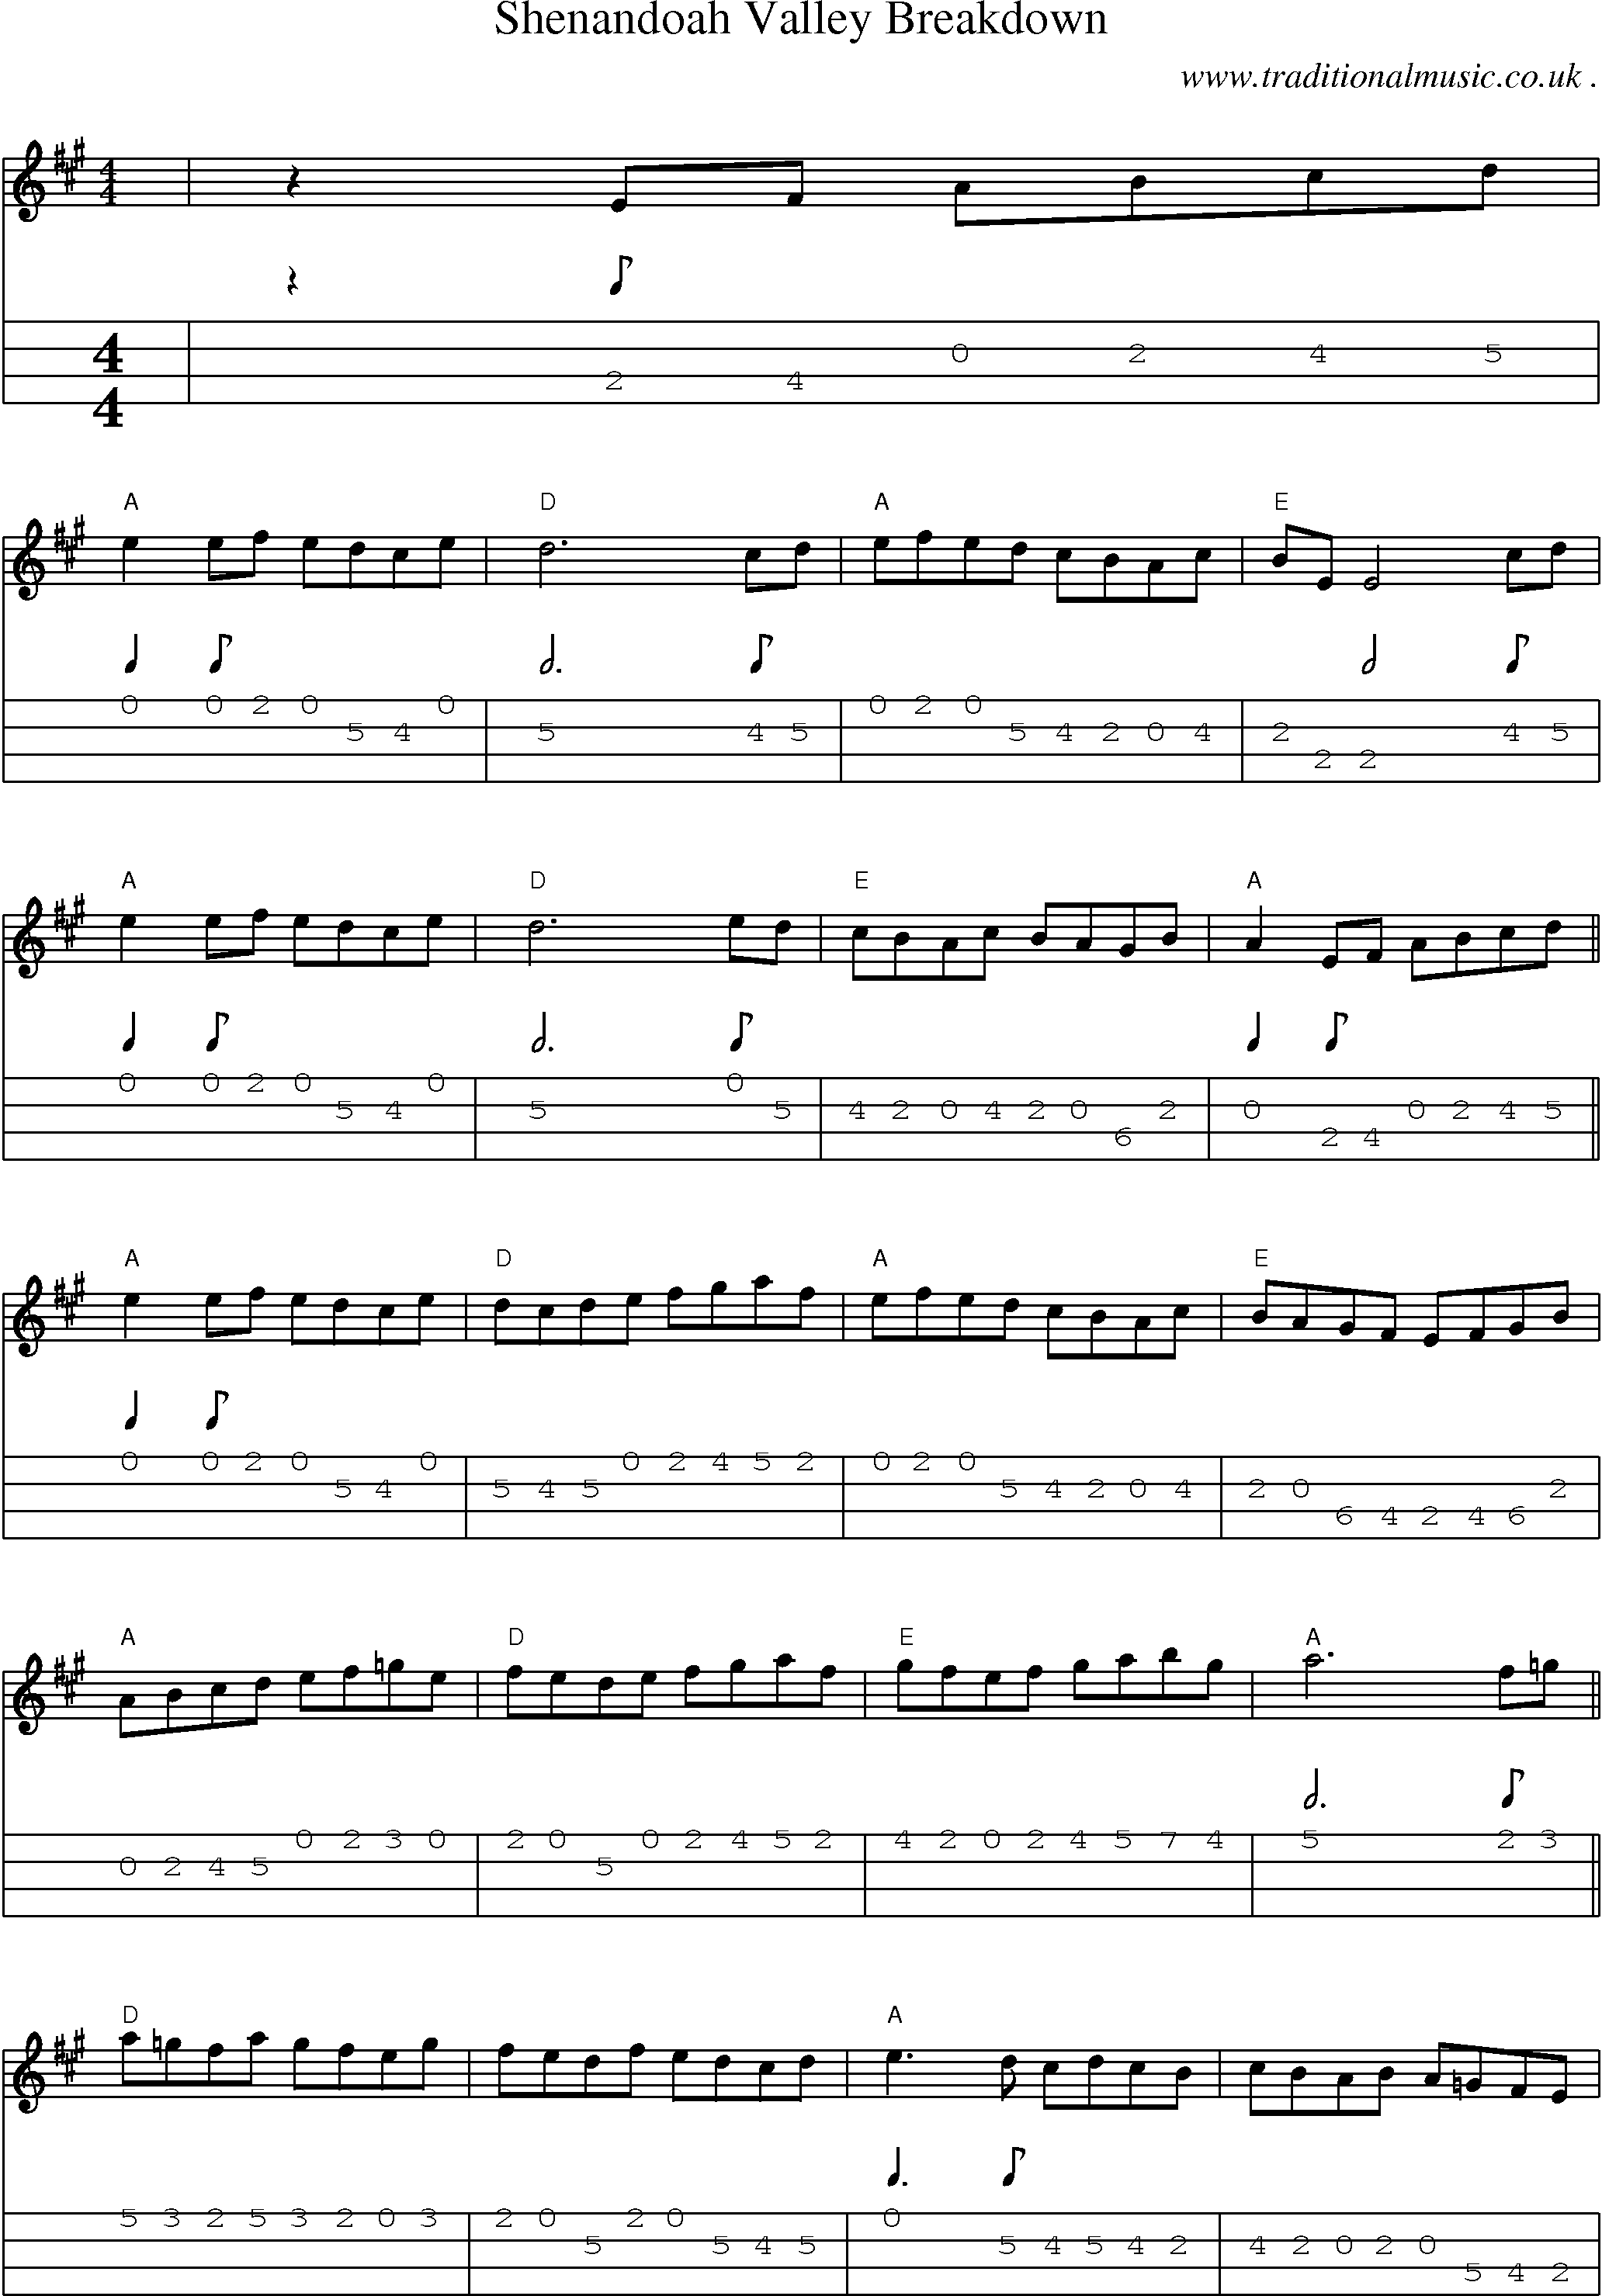 Music Score and Mandolin Tabs for Shenandoah Valley Breakdown